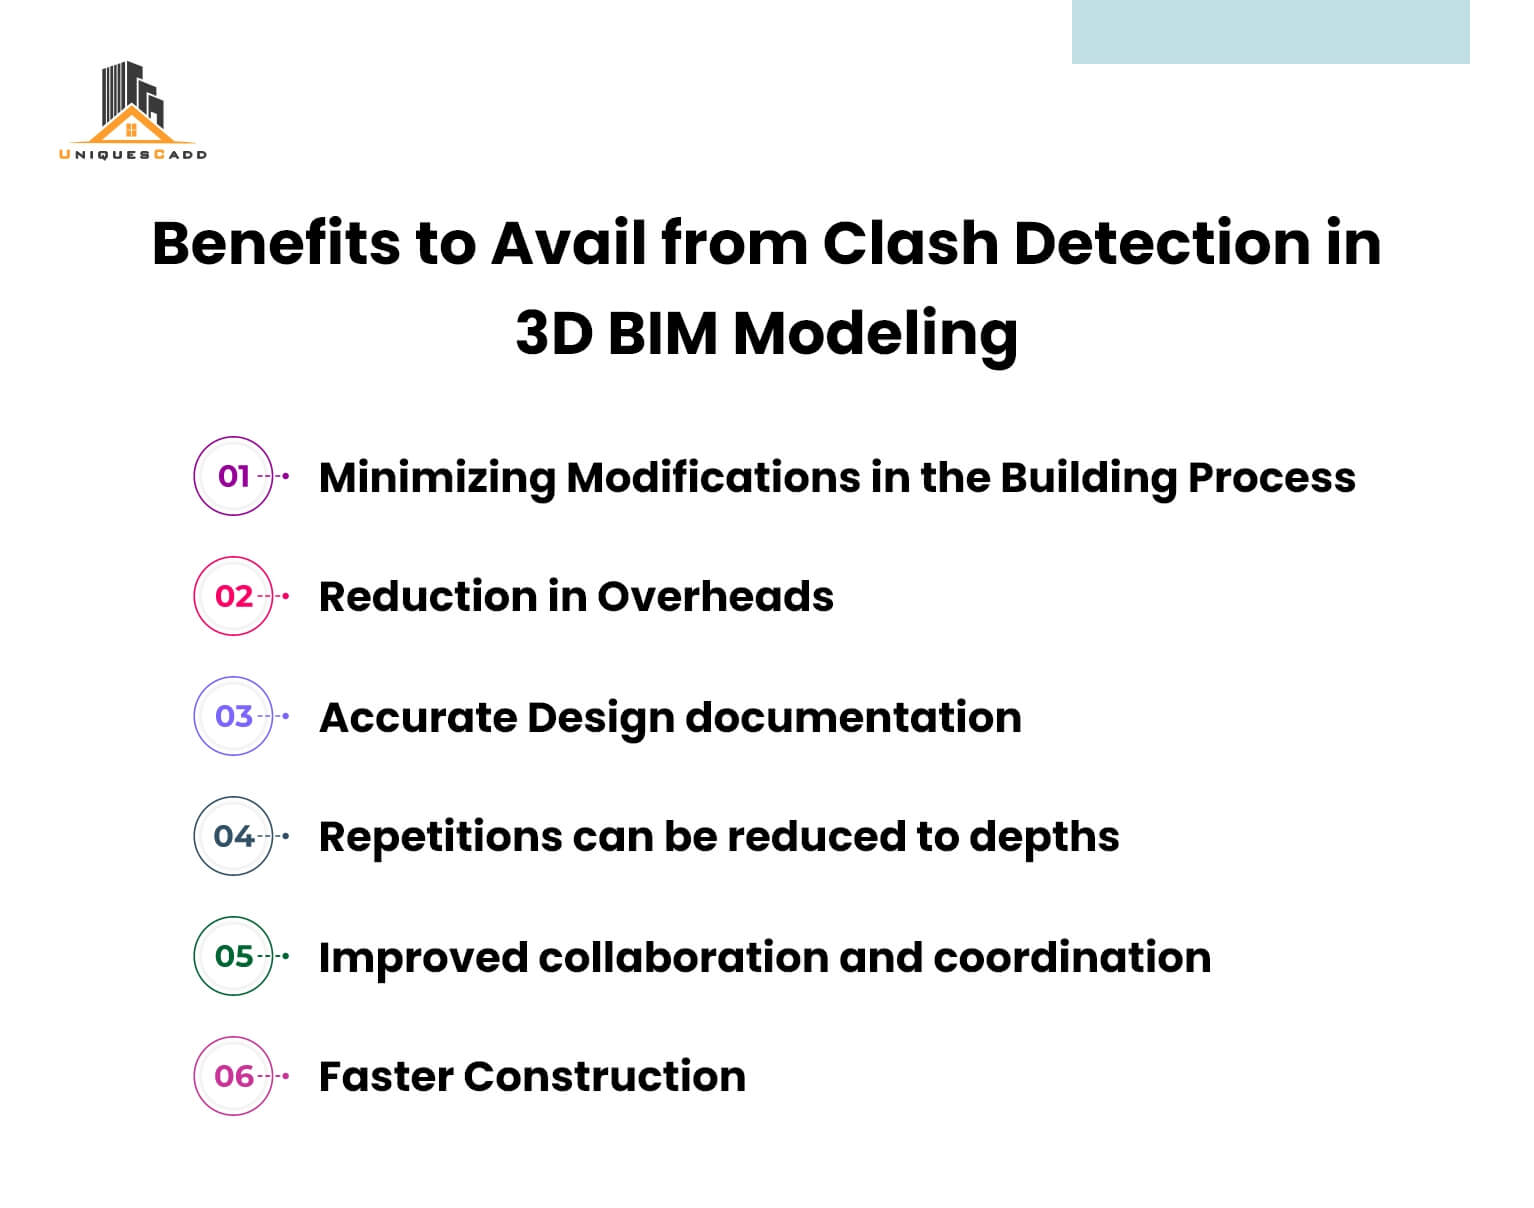 Benefits to Avail from Clash Detection in 3D BIM Modeling